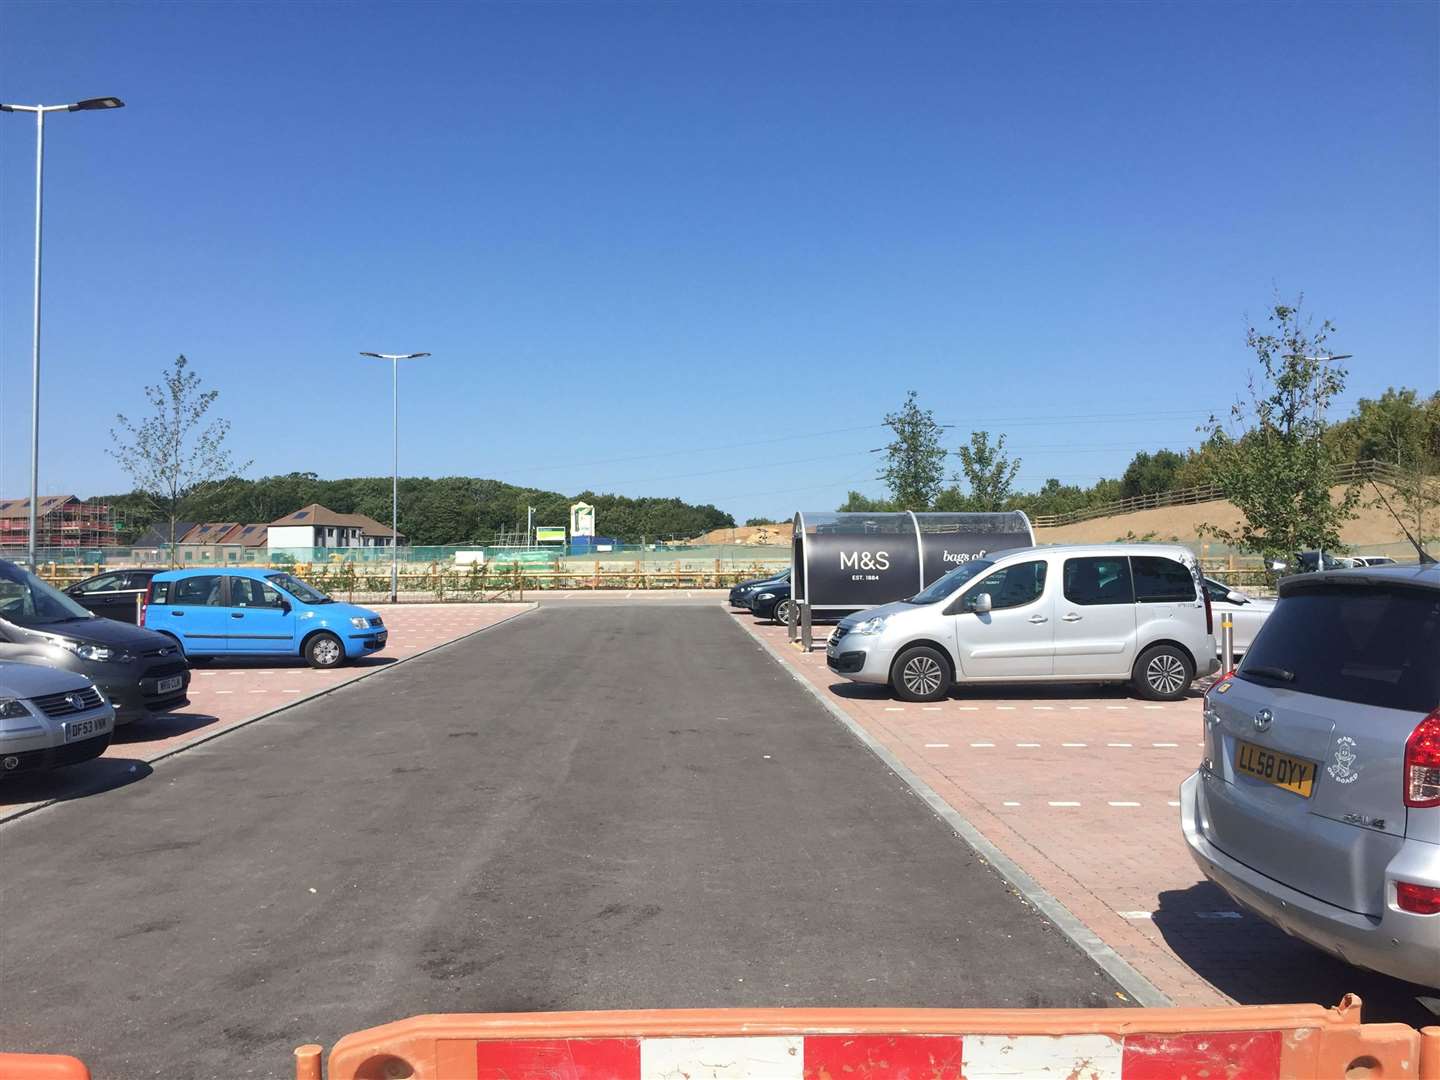 The new car park has 260 spaces